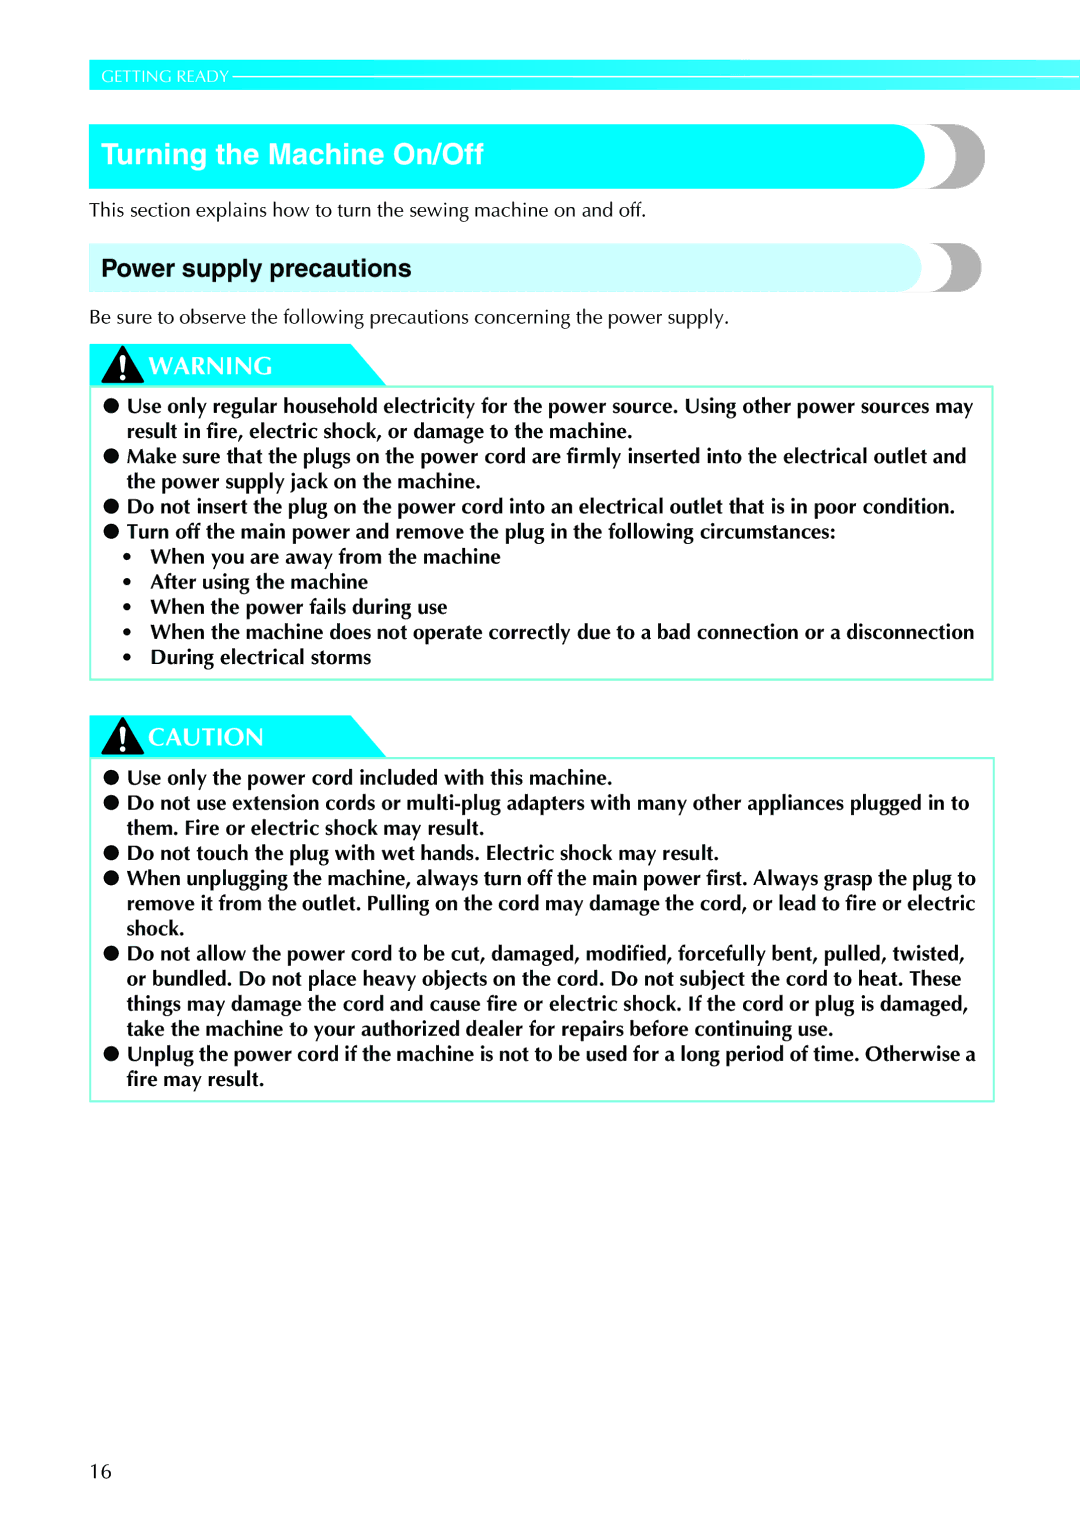 Brother 885-V31/V33 operation manual Turning the Machine On/Off, Power supply precautions 